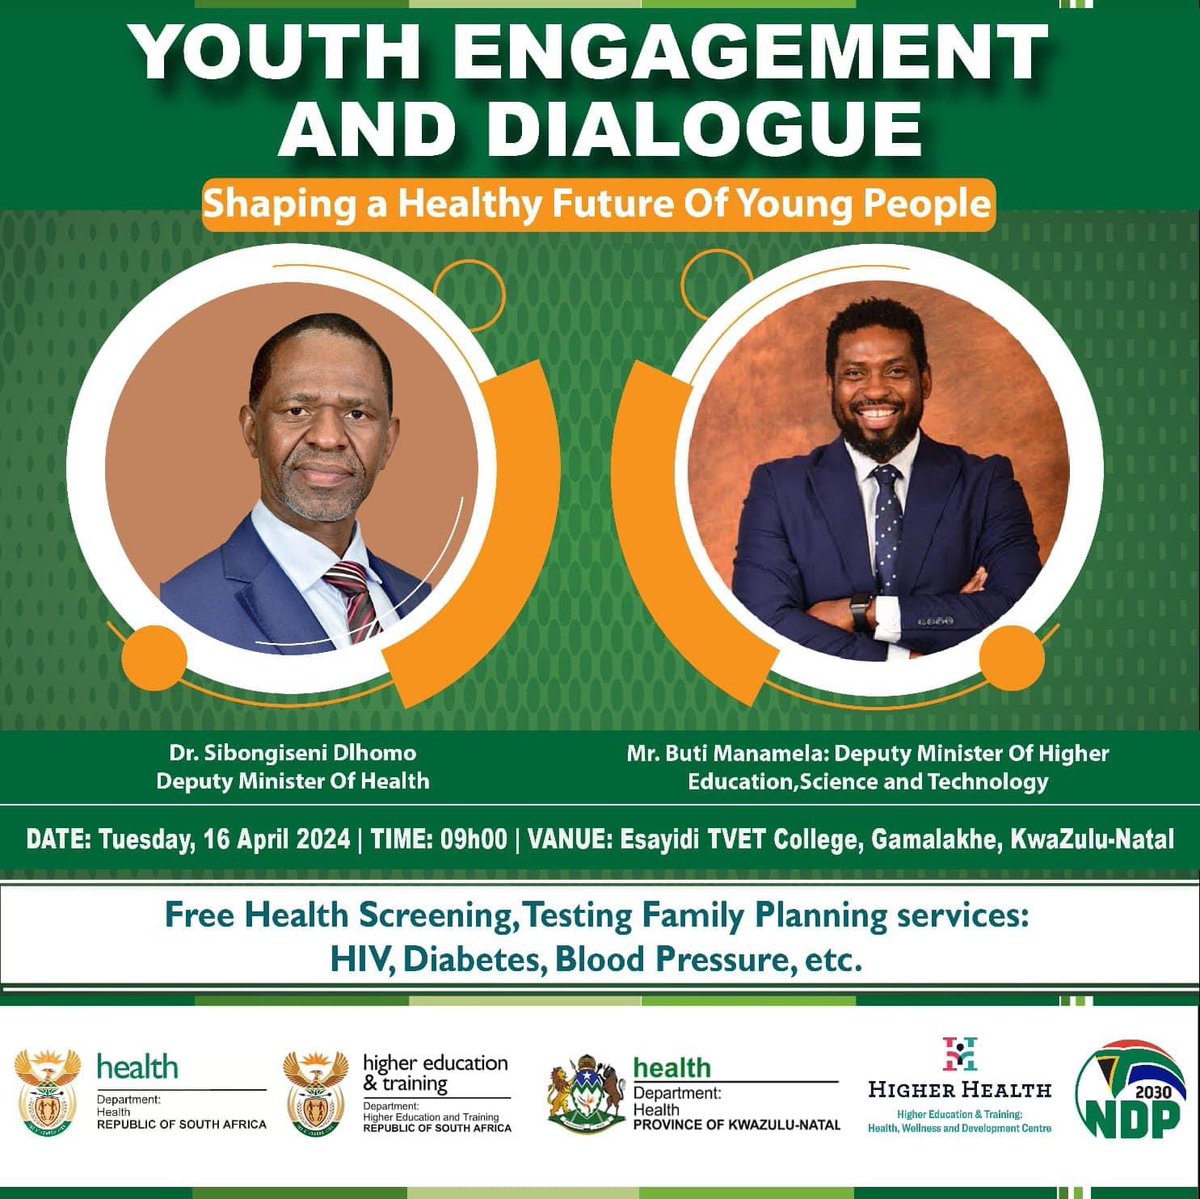 Today, Higher Health, in collaboration with Department of Health & Esayidi TVET College, is hosting a Youth Engagement and Dialogue event at the Gamalakhe campus in KwaZulu-Natal attended by our Deputy Minister, Mr @ButiManamela & Deputy Minister of Health, Dr Sibongiseni Dlhomo.